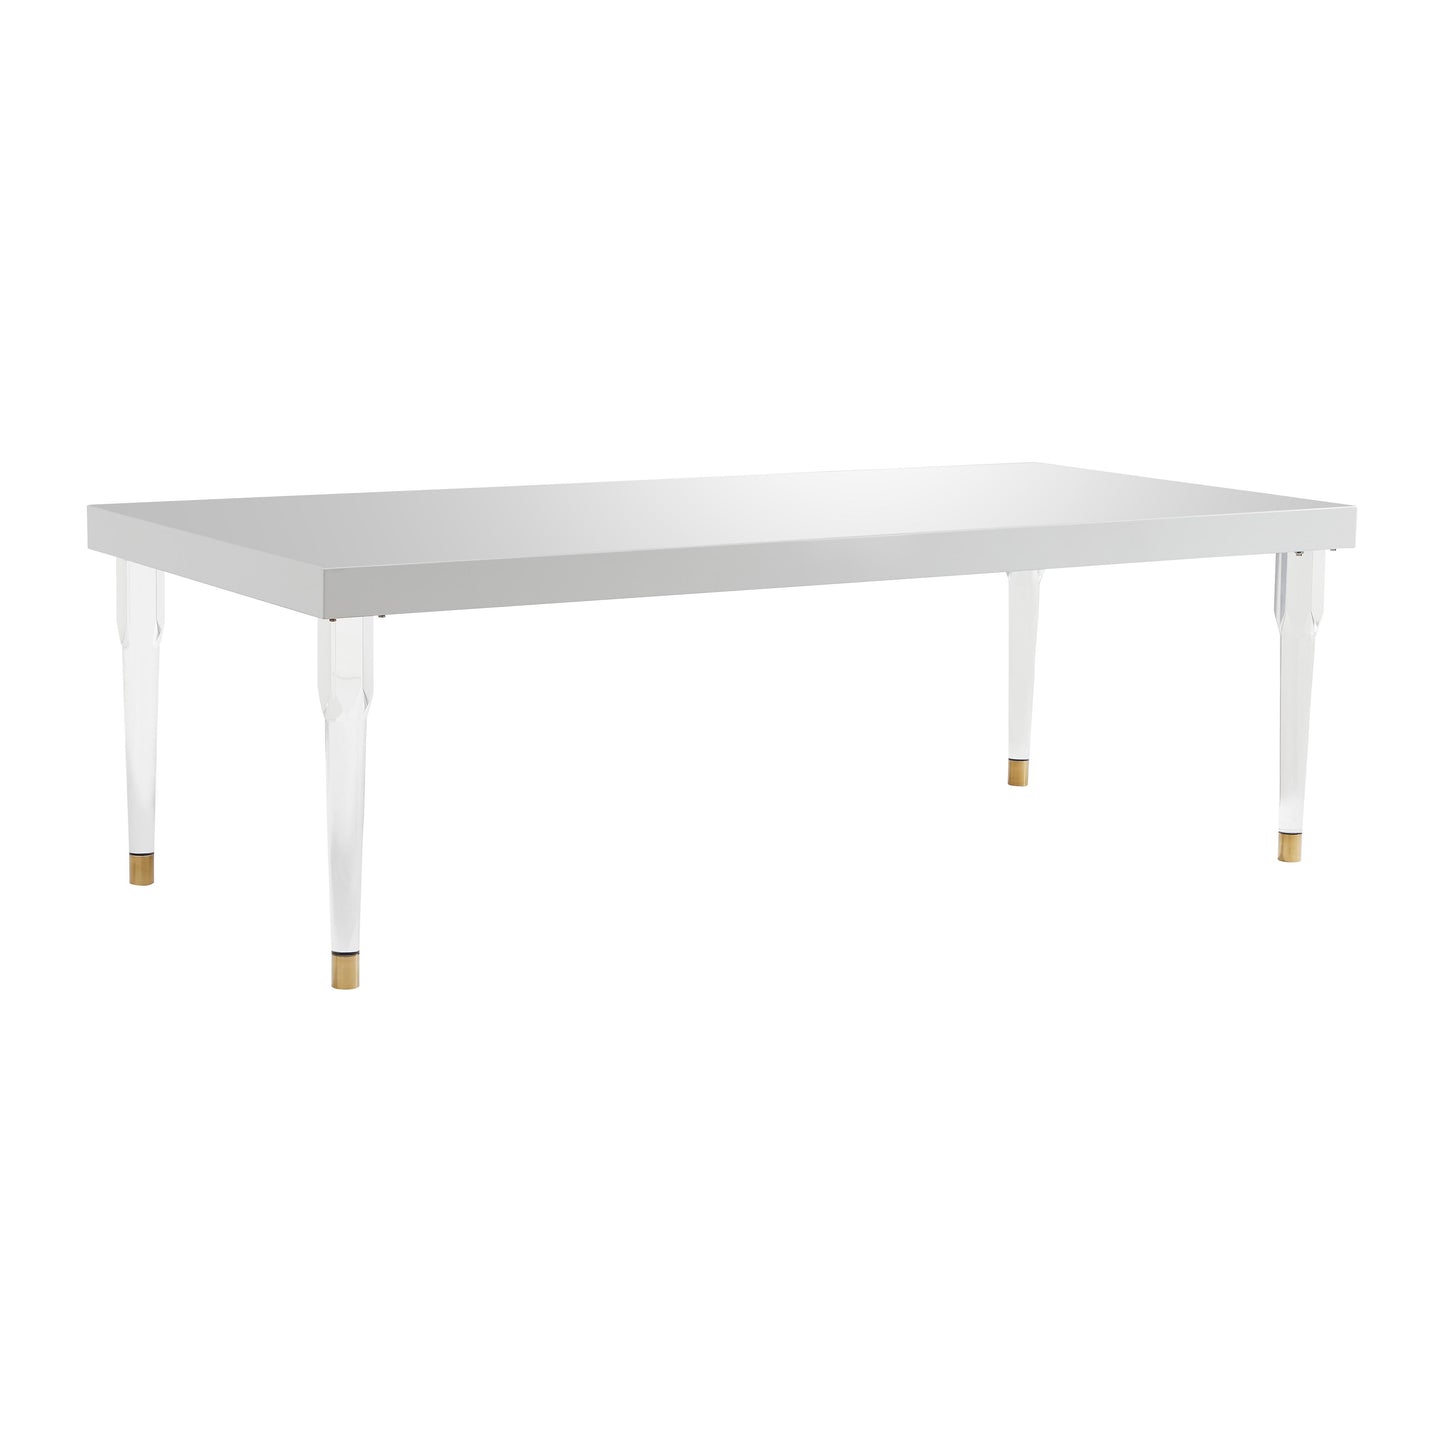 Tov Furniture Tabby Glossy Lacquer Dining Table